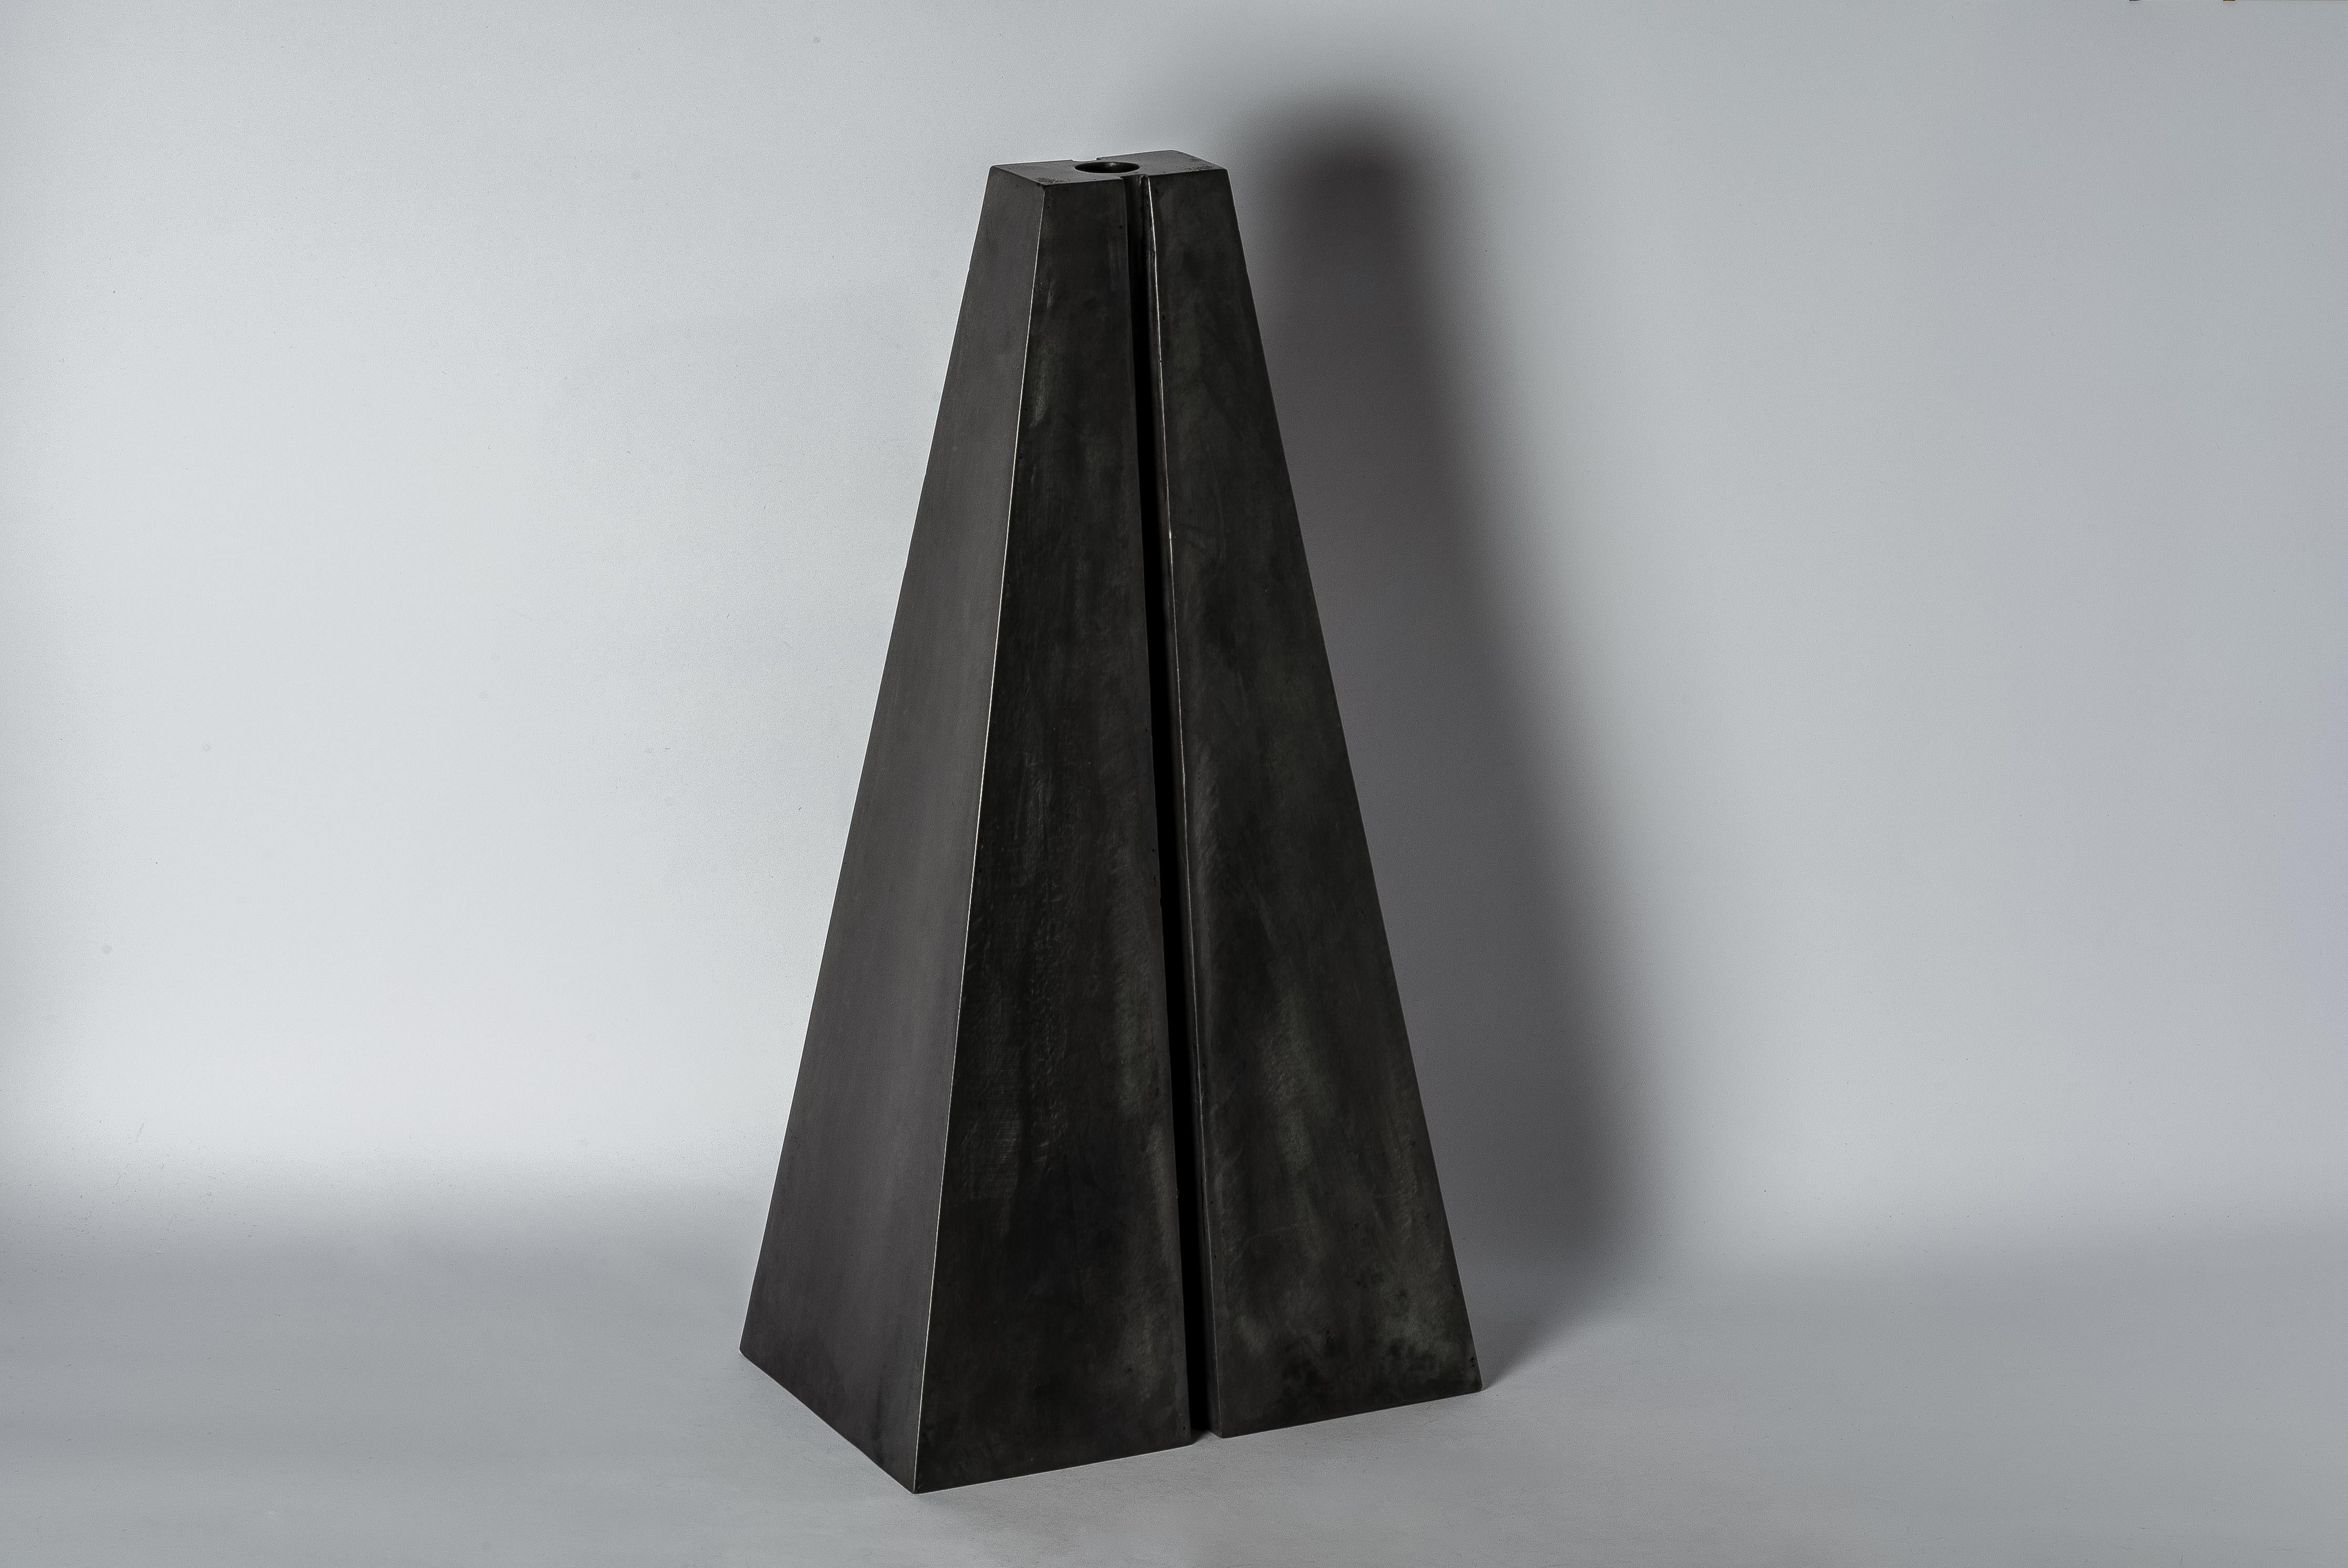 Judd Runner Candle Tower (Large, AI) In New Condition For Sale In Hong Kong, Hong Kong Island